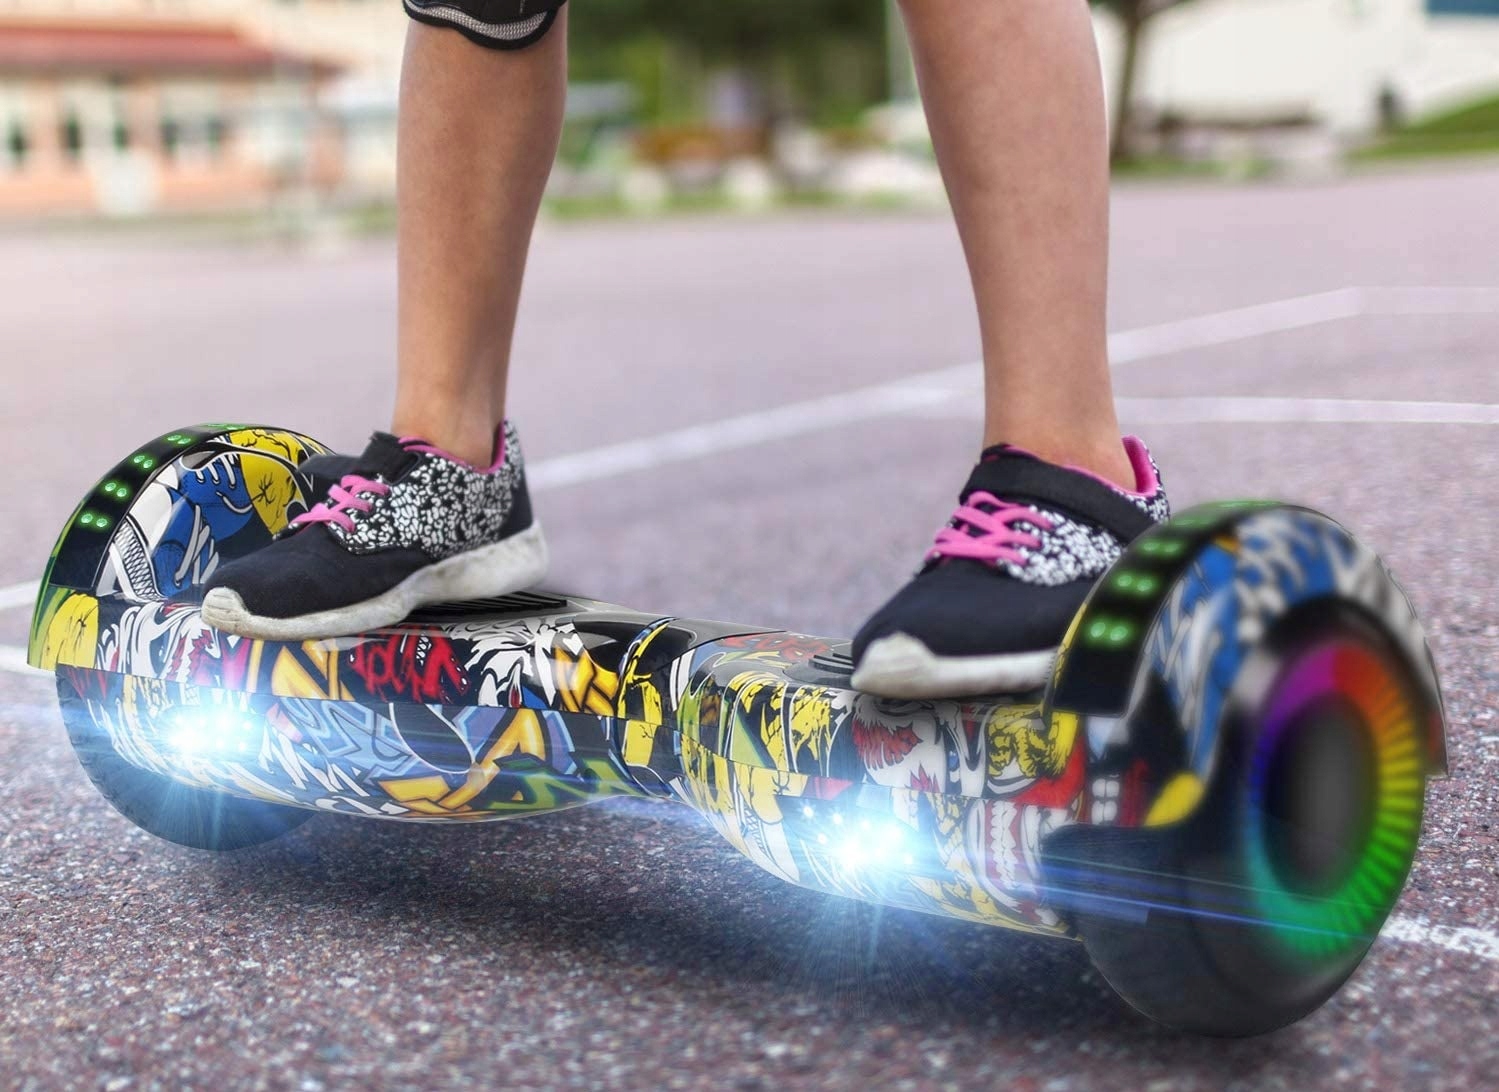 ELECTRIC HOVERBOARD 6.5 INCH BOARD Brand other brand